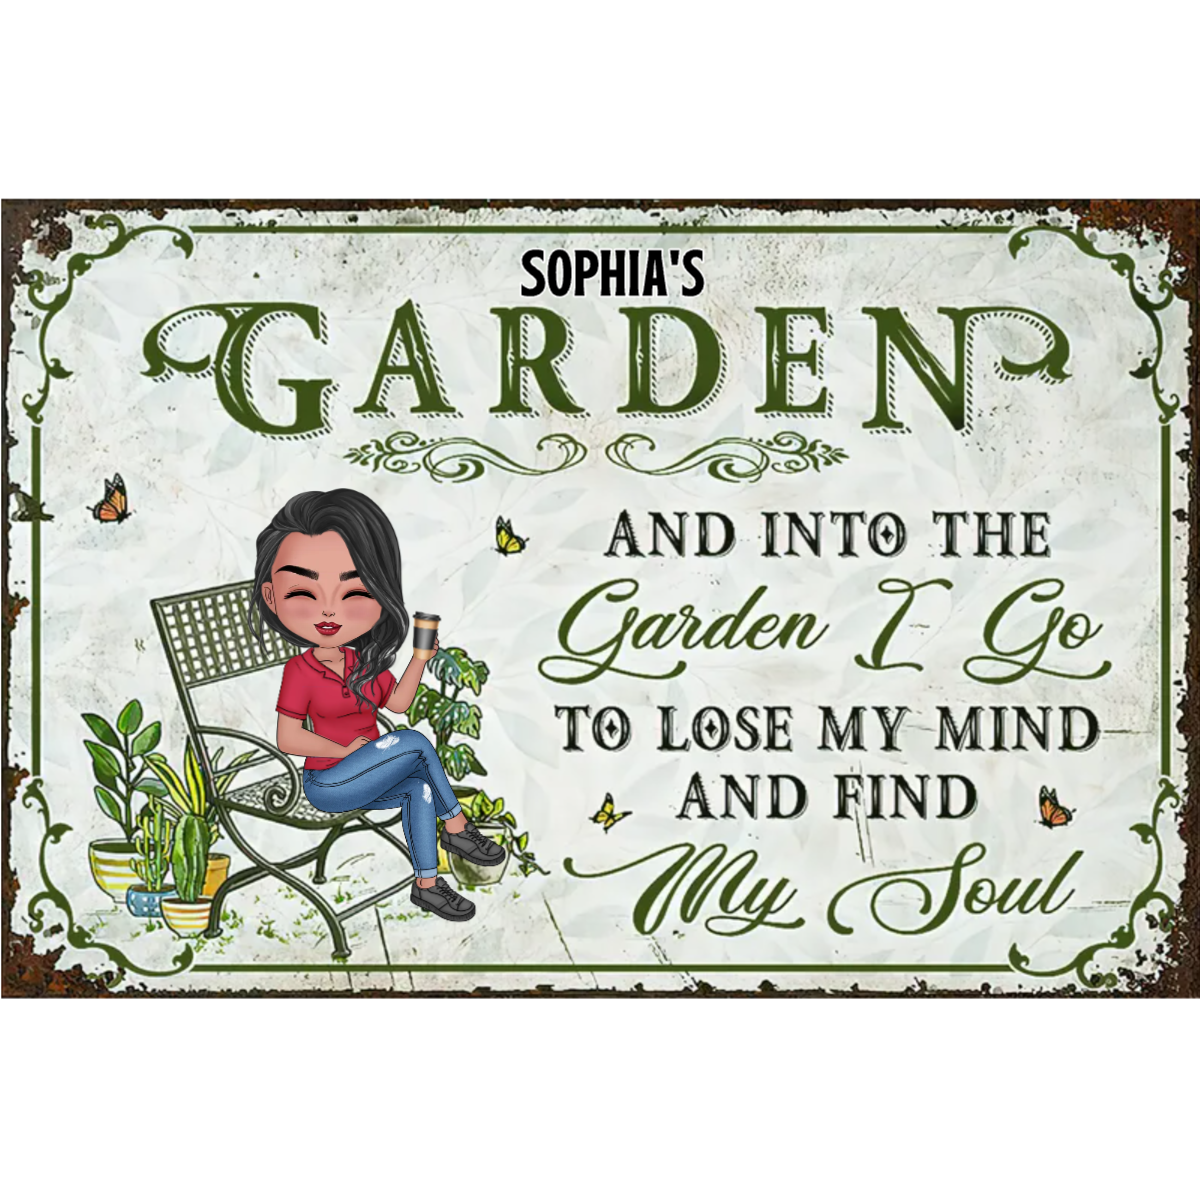 Into the Garden II go to lose my mind & find my spirit| Personalized Classic Metal Sign, White